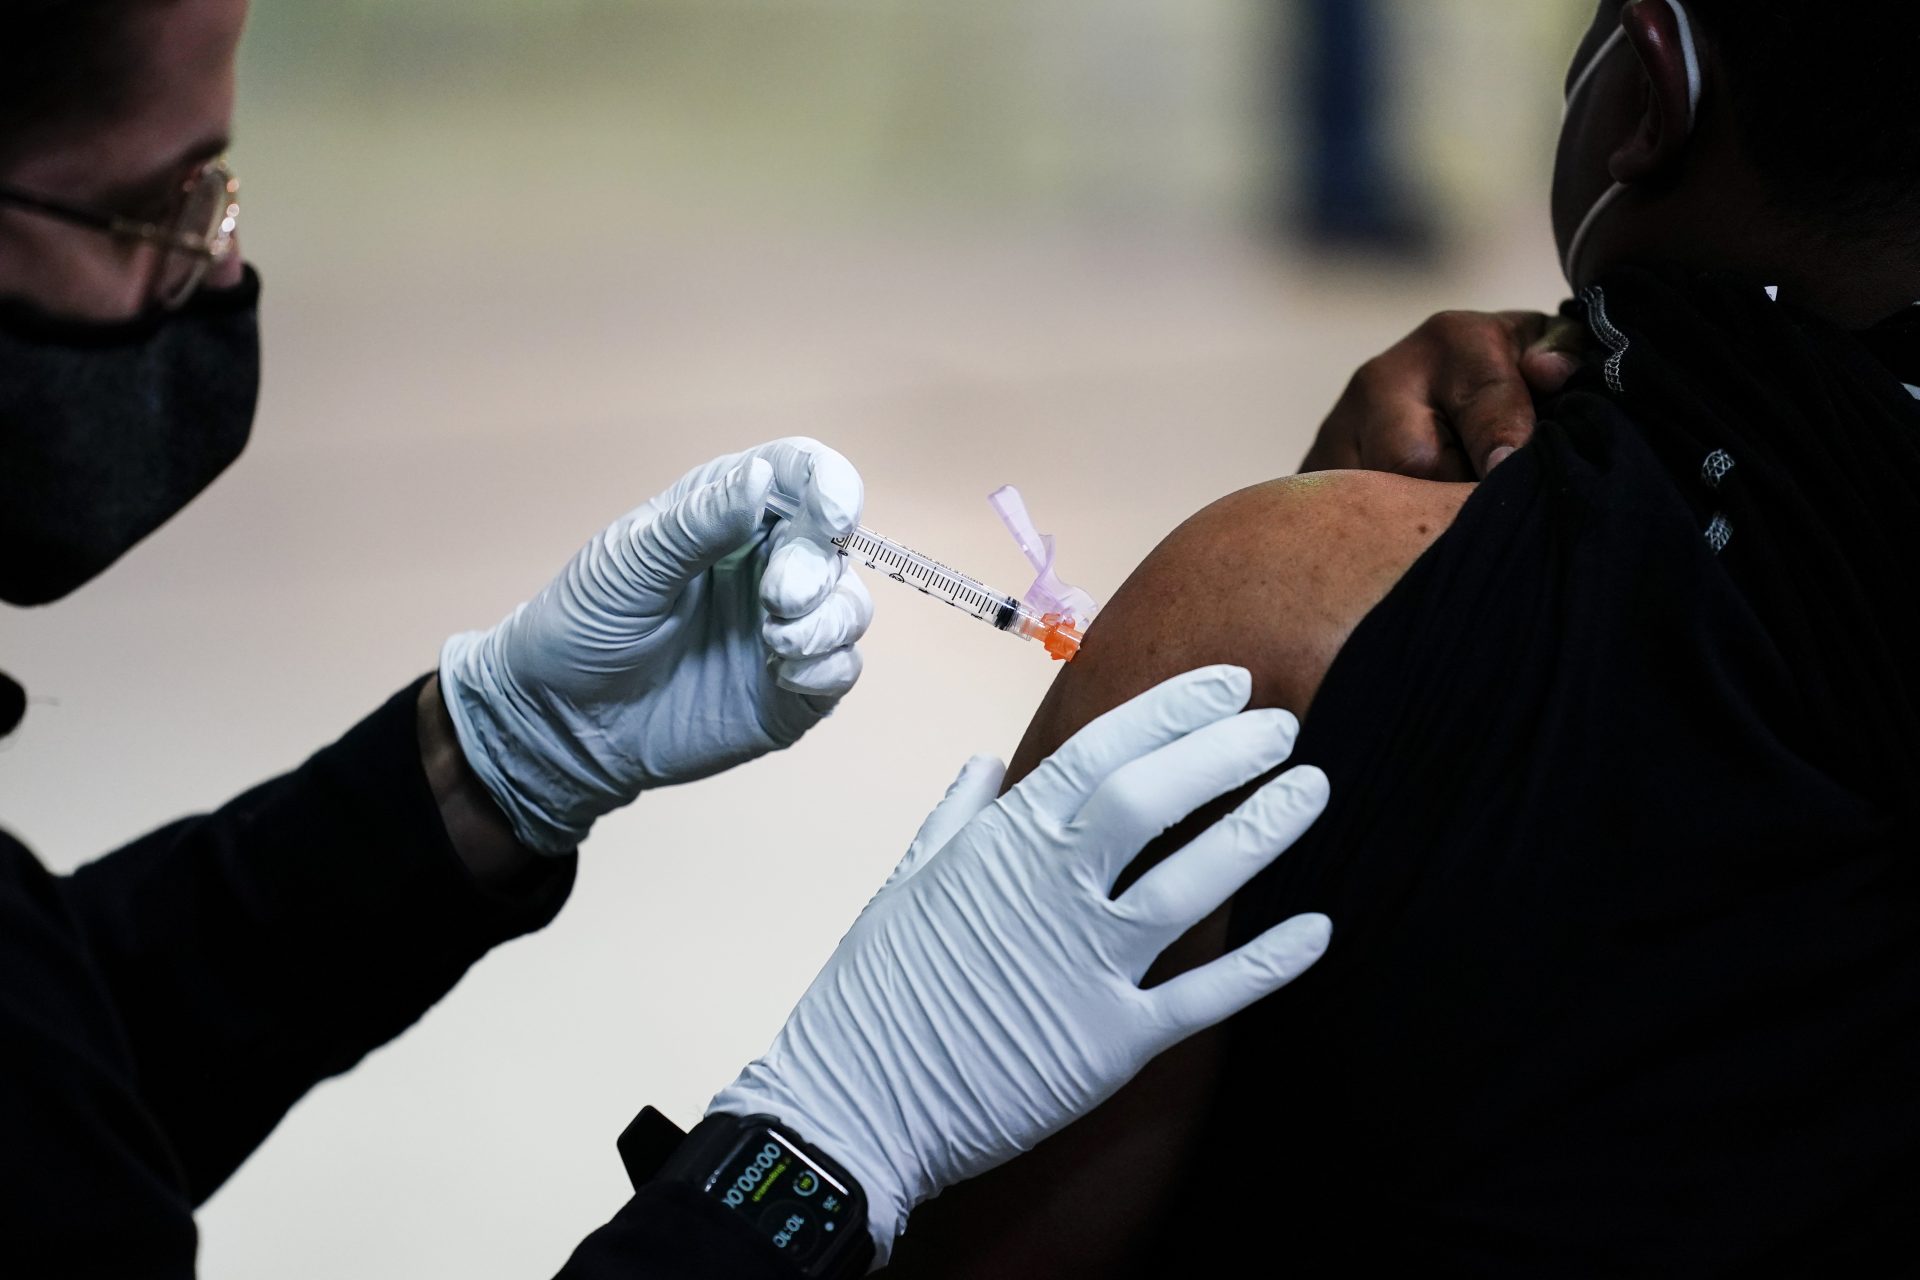 A member of the Philadelphia Fire Department administers the Johnson & Johnson COVID-19 vaccine to a person at a vaccination site at a Salvation Army location in Philadelphia on March 26, 2021.